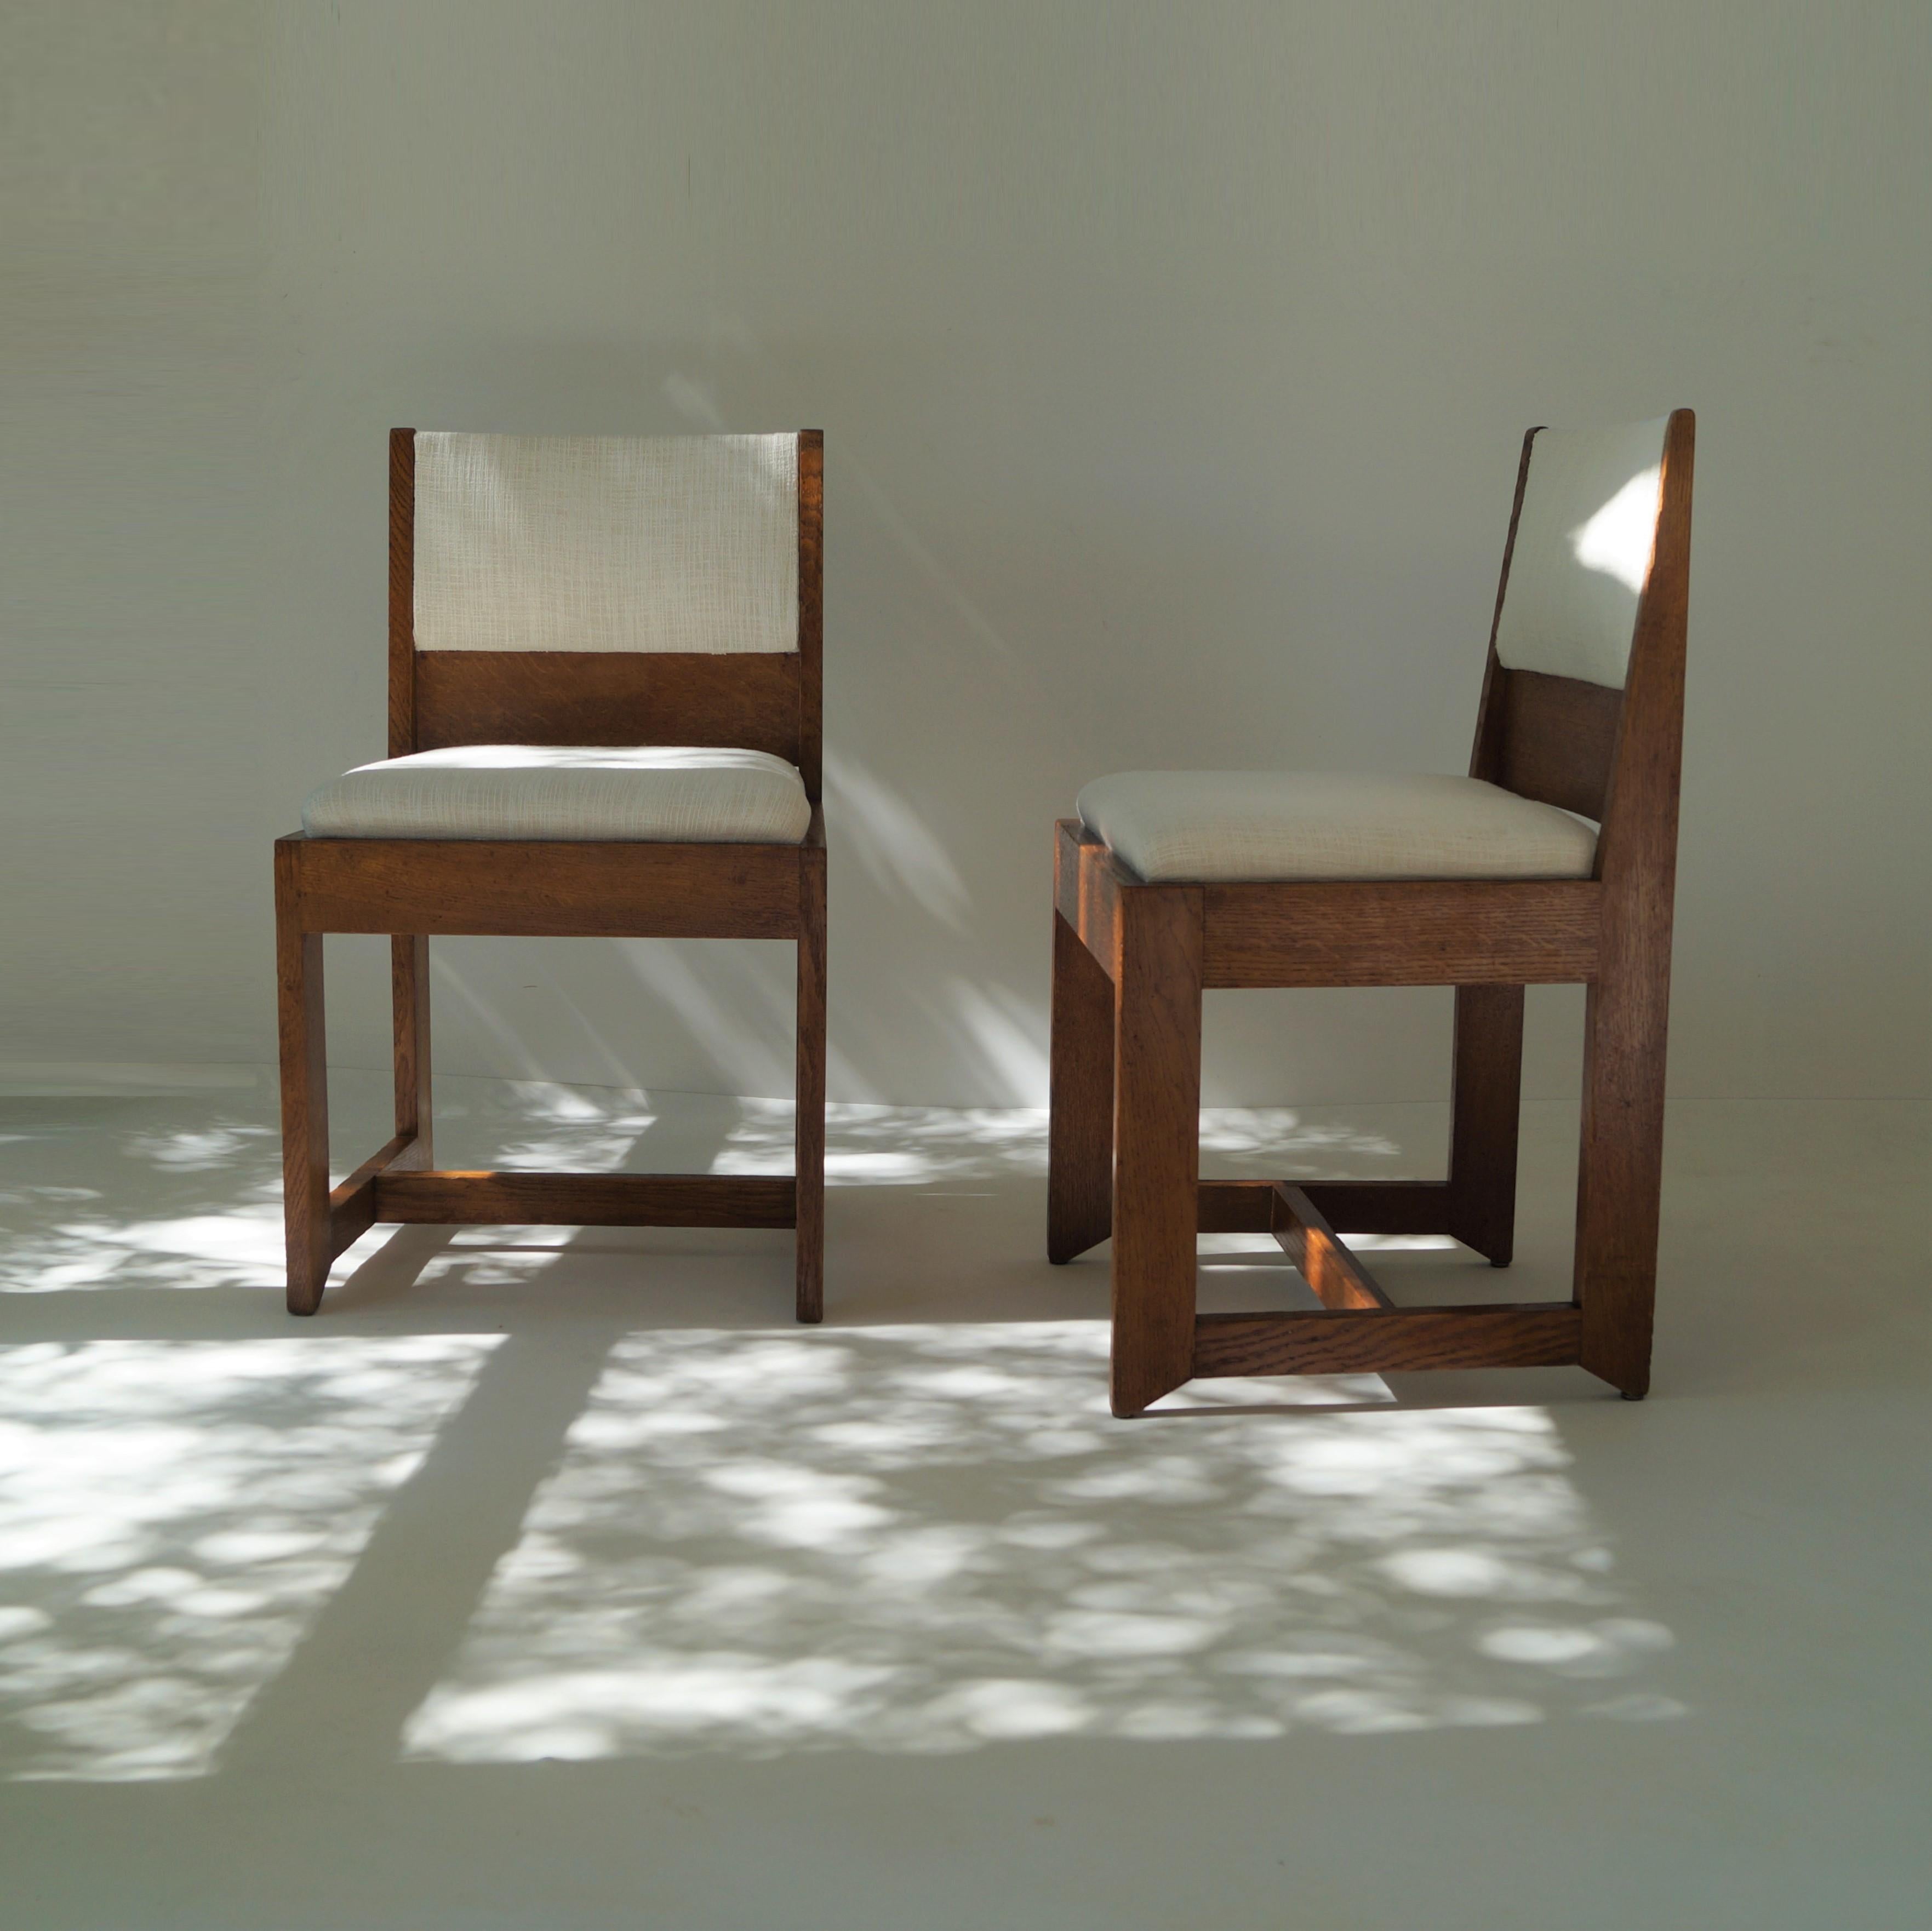 Dutch Art Deco Modernist set of chairs by H. Wouda for Pander, 1924 For Sale 8